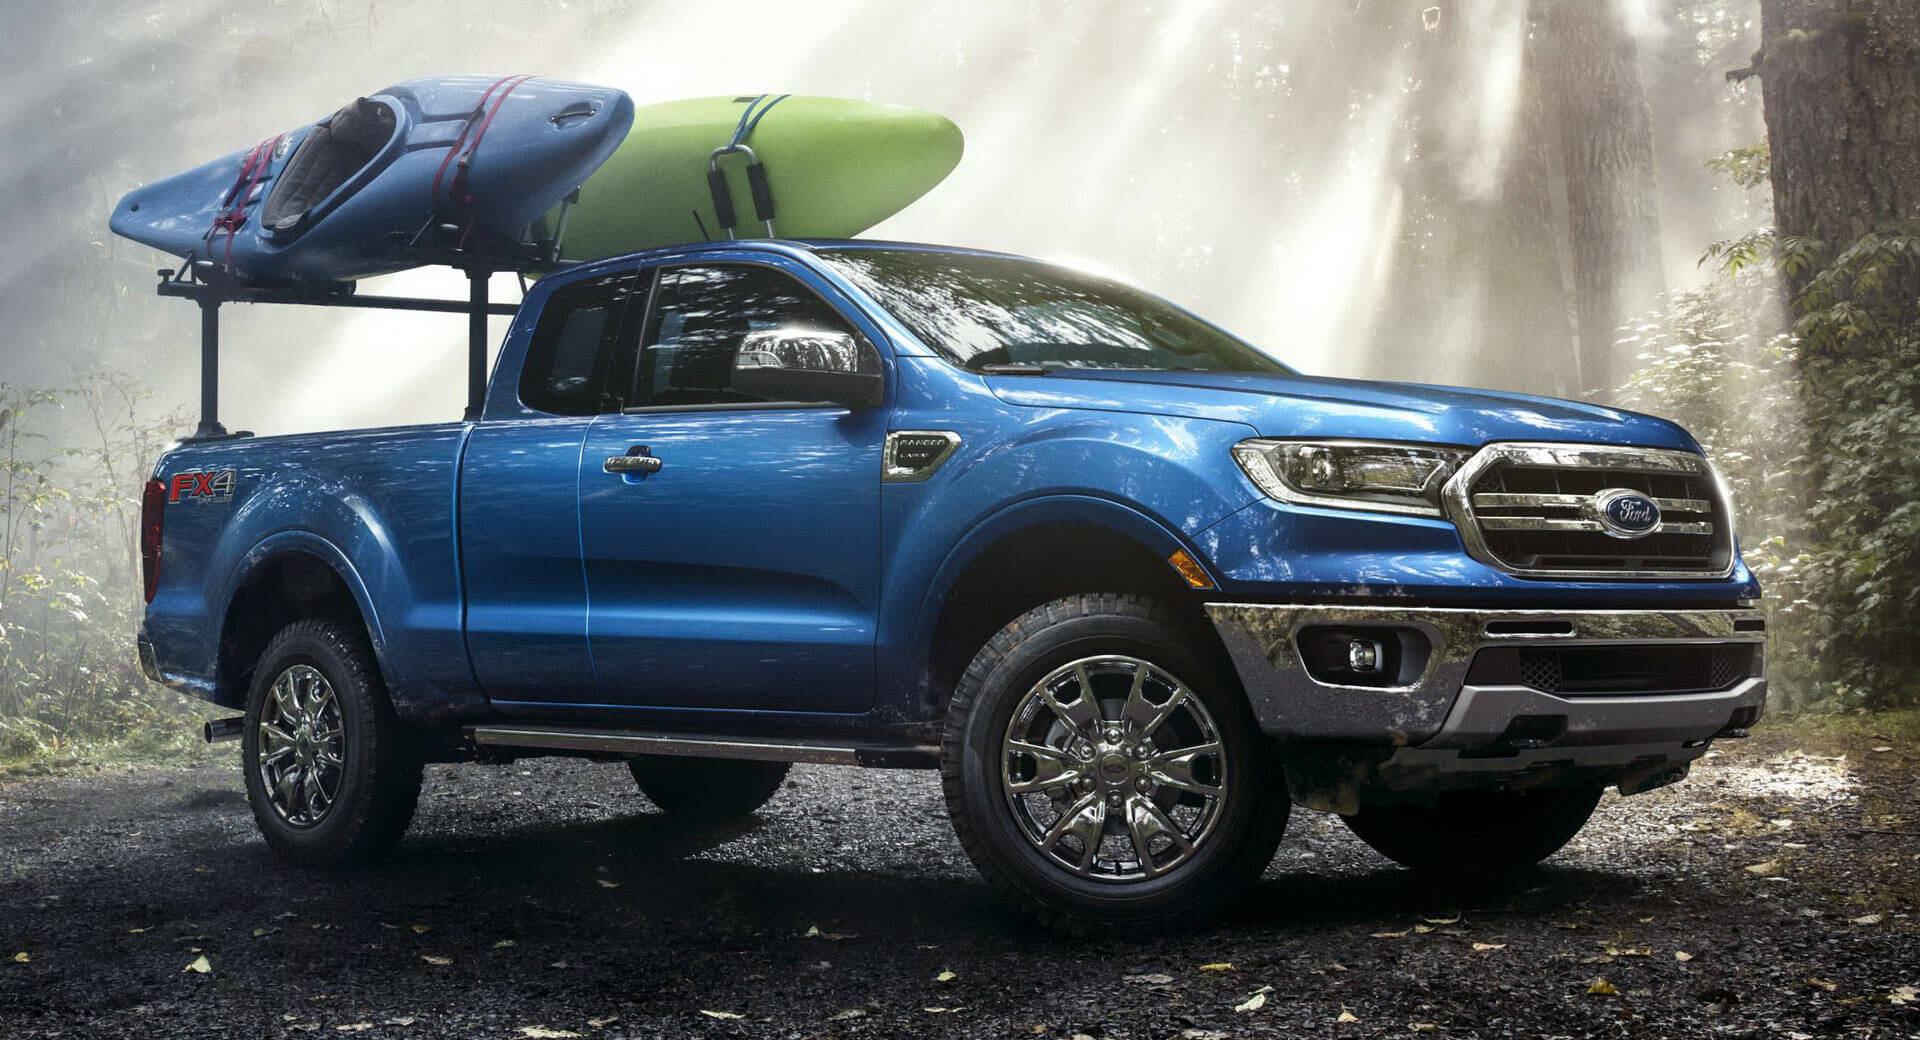 These Are All The Accessories You Can Order For The 2019 Ford Ranger